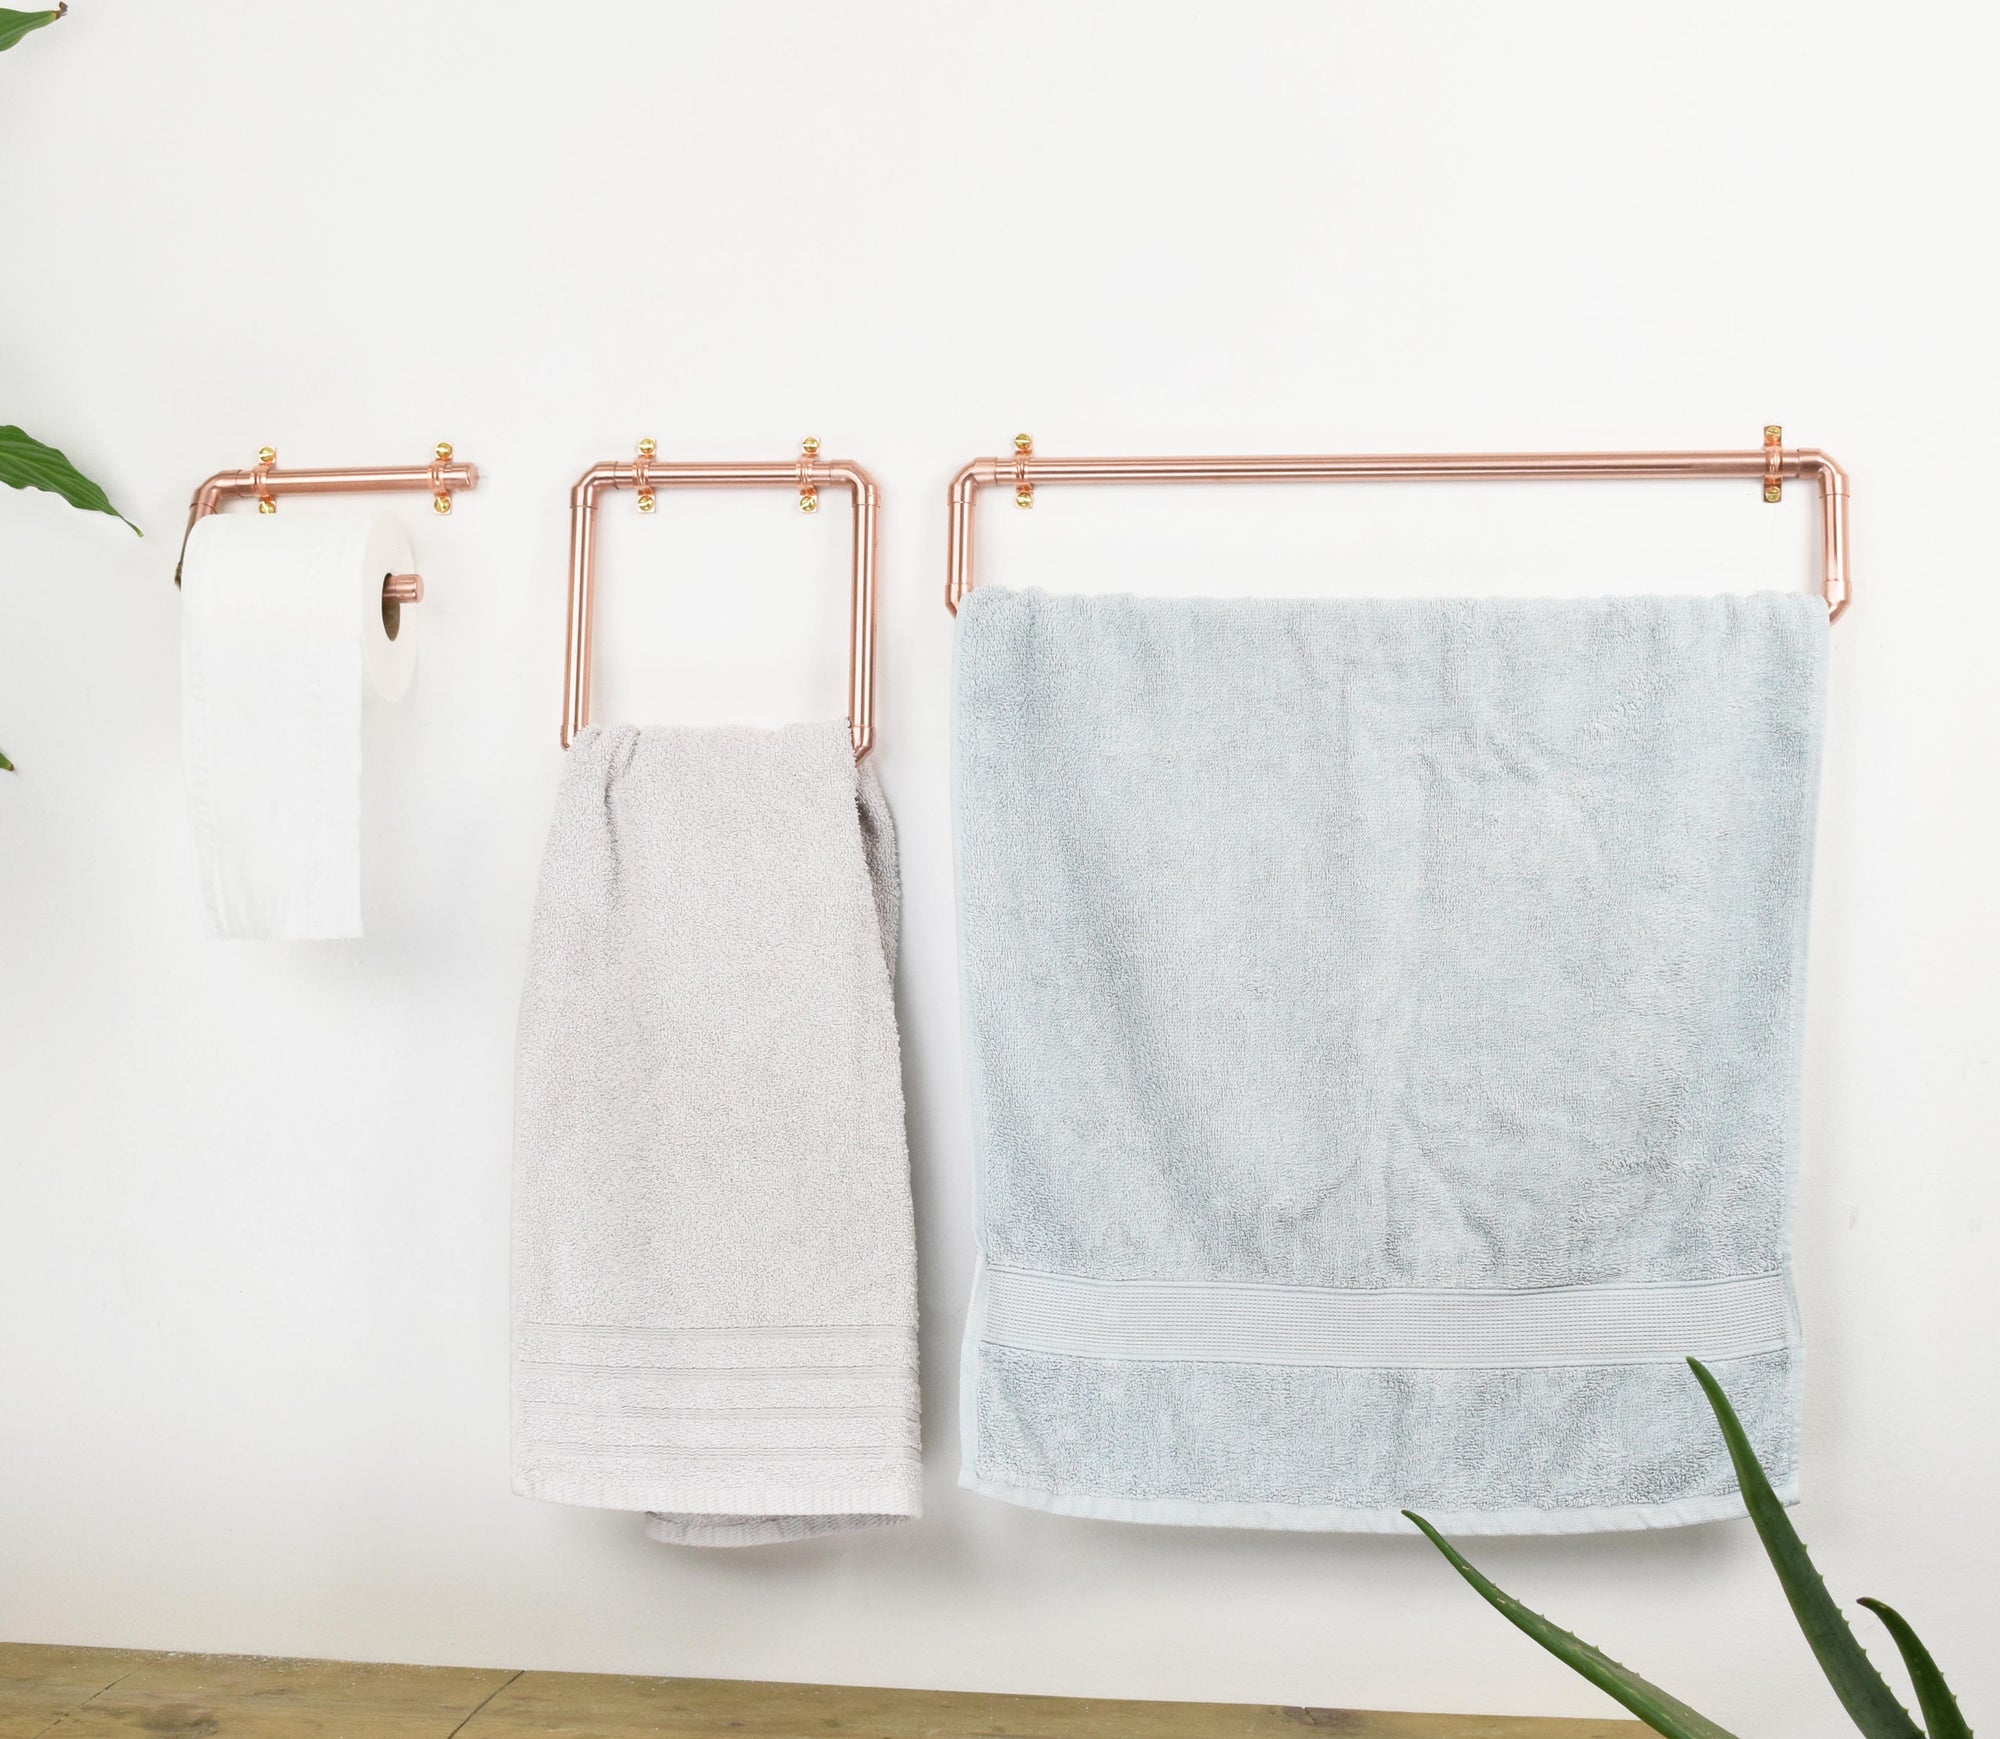 Copper Bathroom Set with towels